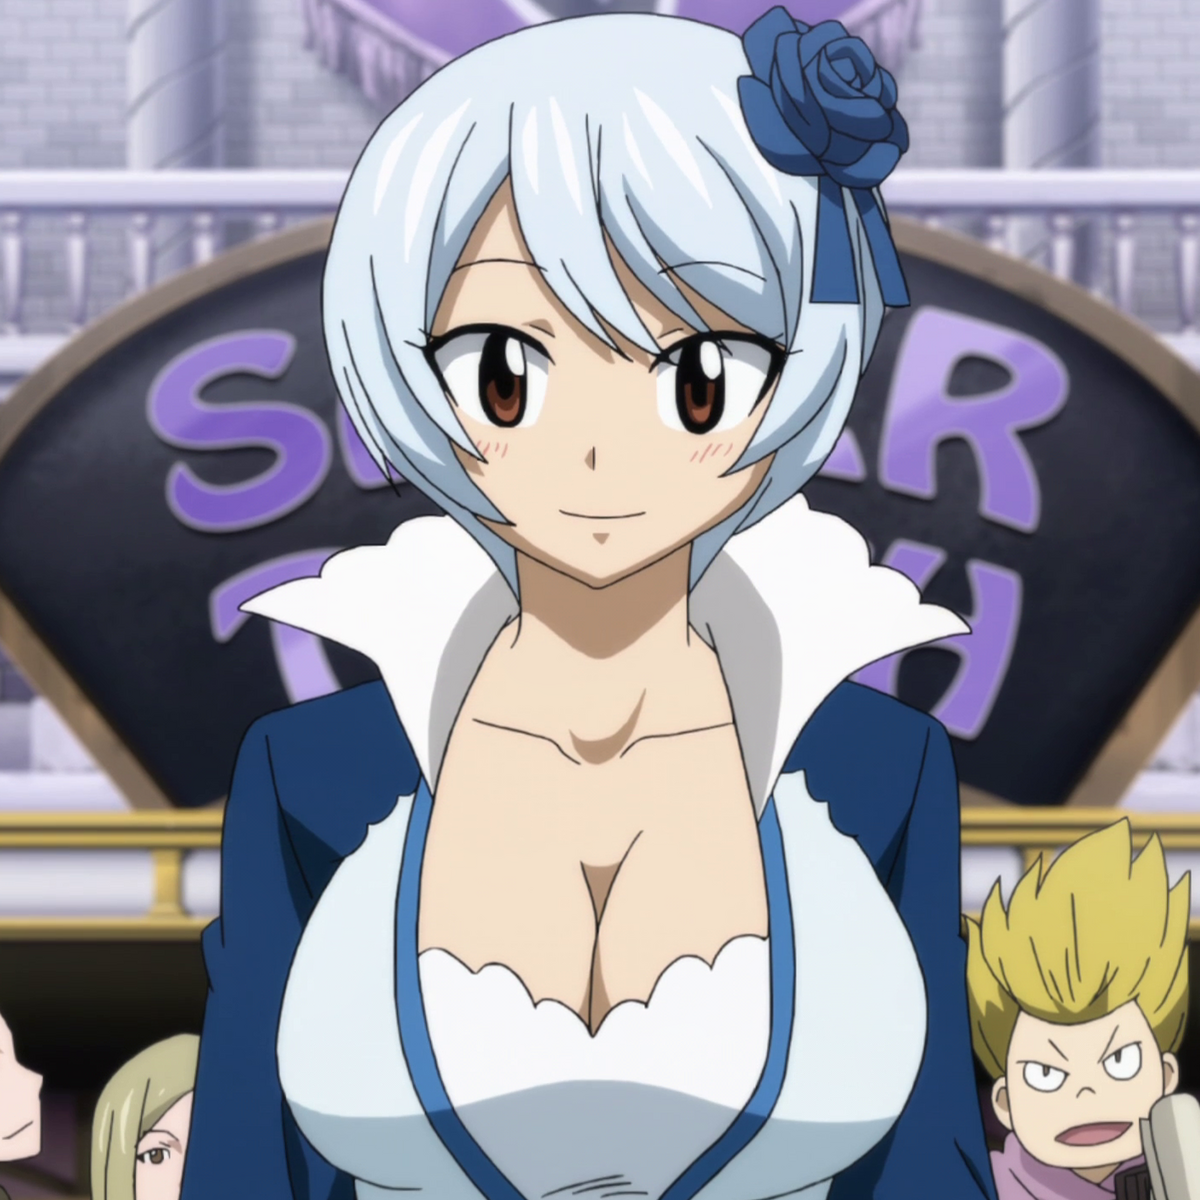 Who Is The Main Character Of Fairy Tail? - Animevania